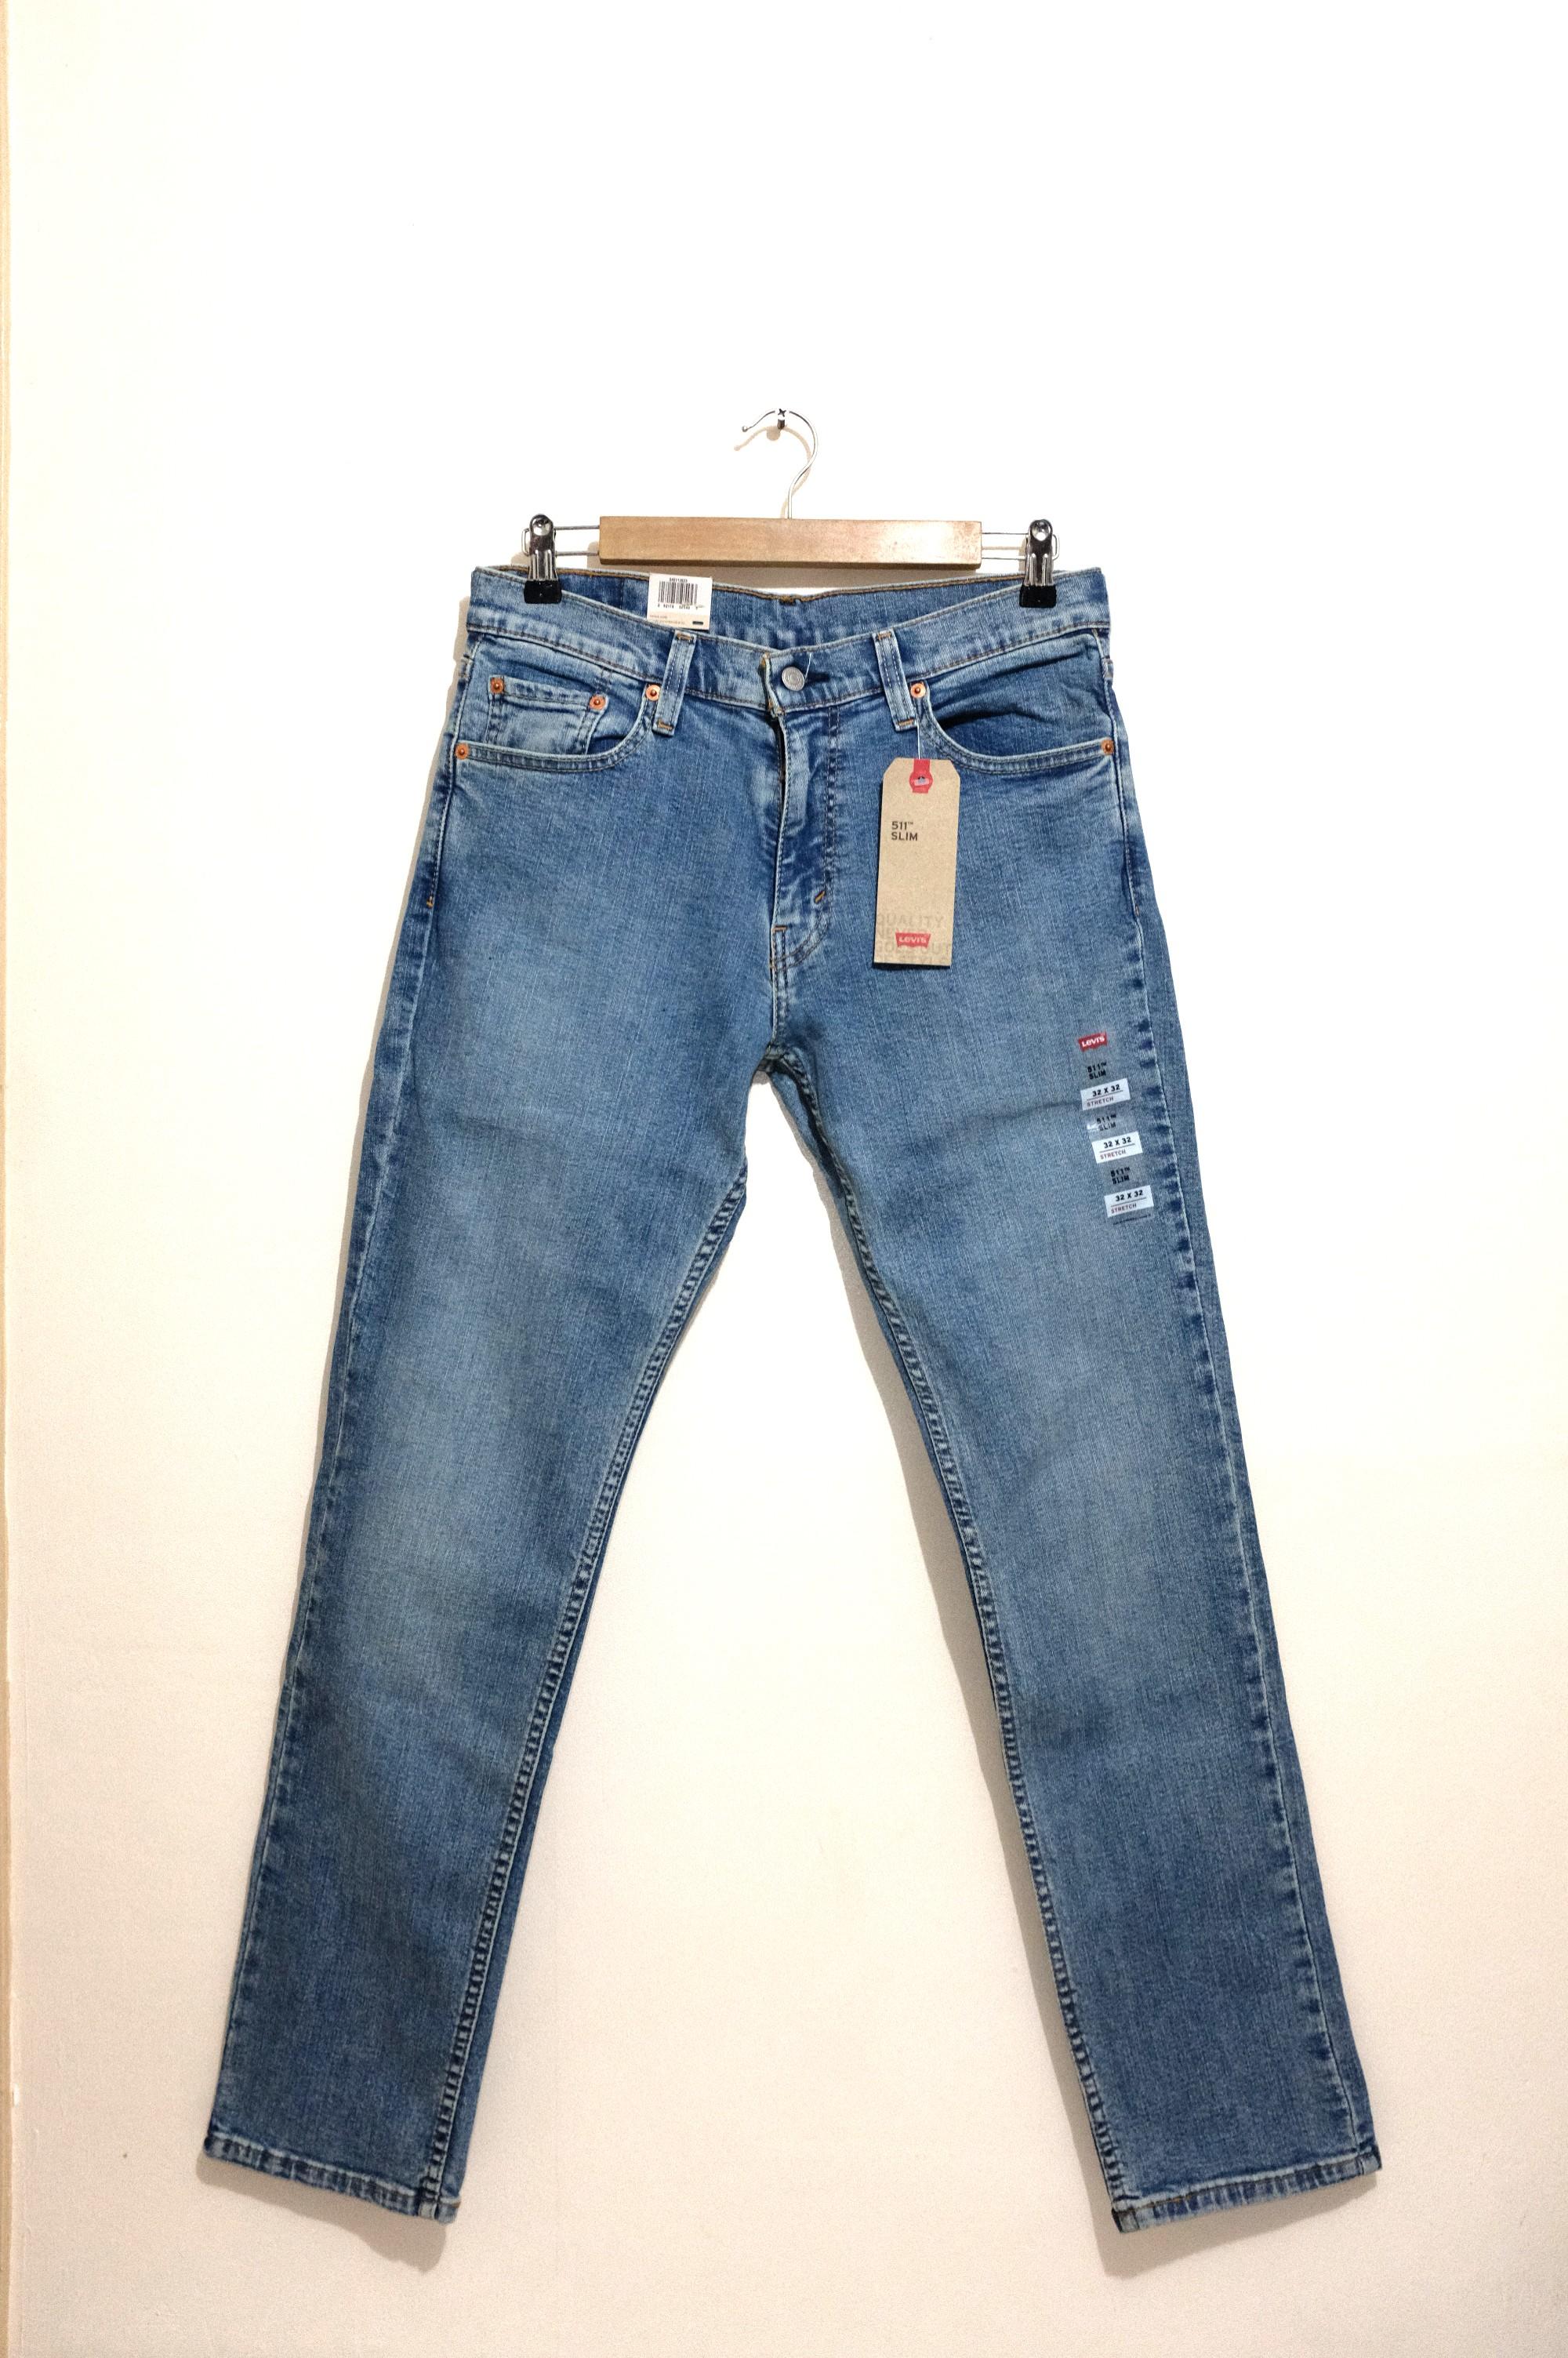 32 32 jeans